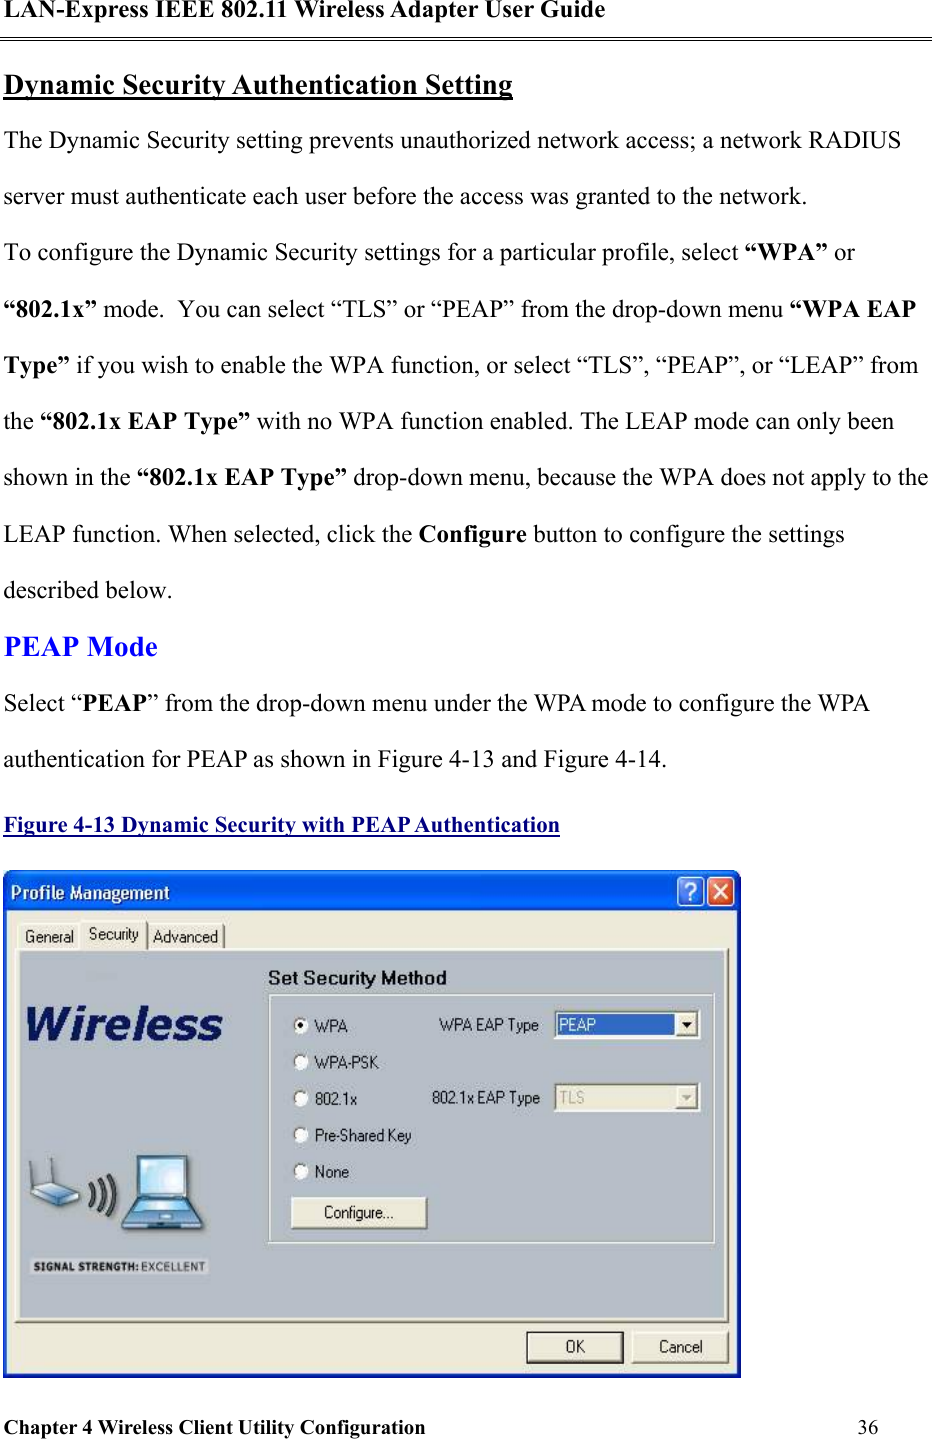 LAN-Express IEEE 802.11 Wireless Adapter User Guide Chapter 4 Wireless Client Utility Configuration   36  Dynamic Security Authentication Setting The Dynamic Security setting prevents unauthorized network access; a network RADIUS server must authenticate each user before the access was granted to the network.   To configure the Dynamic Security settings for a particular profile, select “WPA” or “802.1x” mode.  You can select “TLS” or “PEAP” from the drop-down menu “WPA EAP Type” if you wish to enable the WPA function, or select “TLS”, “PEAP”, or “LEAP” from the “802.1x EAP Type” with no WPA function enabled. The LEAP mode can only been shown in the “802.1x EAP Type” drop-down menu, because the WPA does not apply to the LEAP function. When selected, click the Configure button to configure the settings described below.  PEAP Mode Select “PEAP” from the drop-down menu under the WPA mode to configure the WPA authentication for PEAP as shown in Figure 4-13 and Figure 4-14.  Figure 4-13 Dynamic Security with PEAP Authentication  